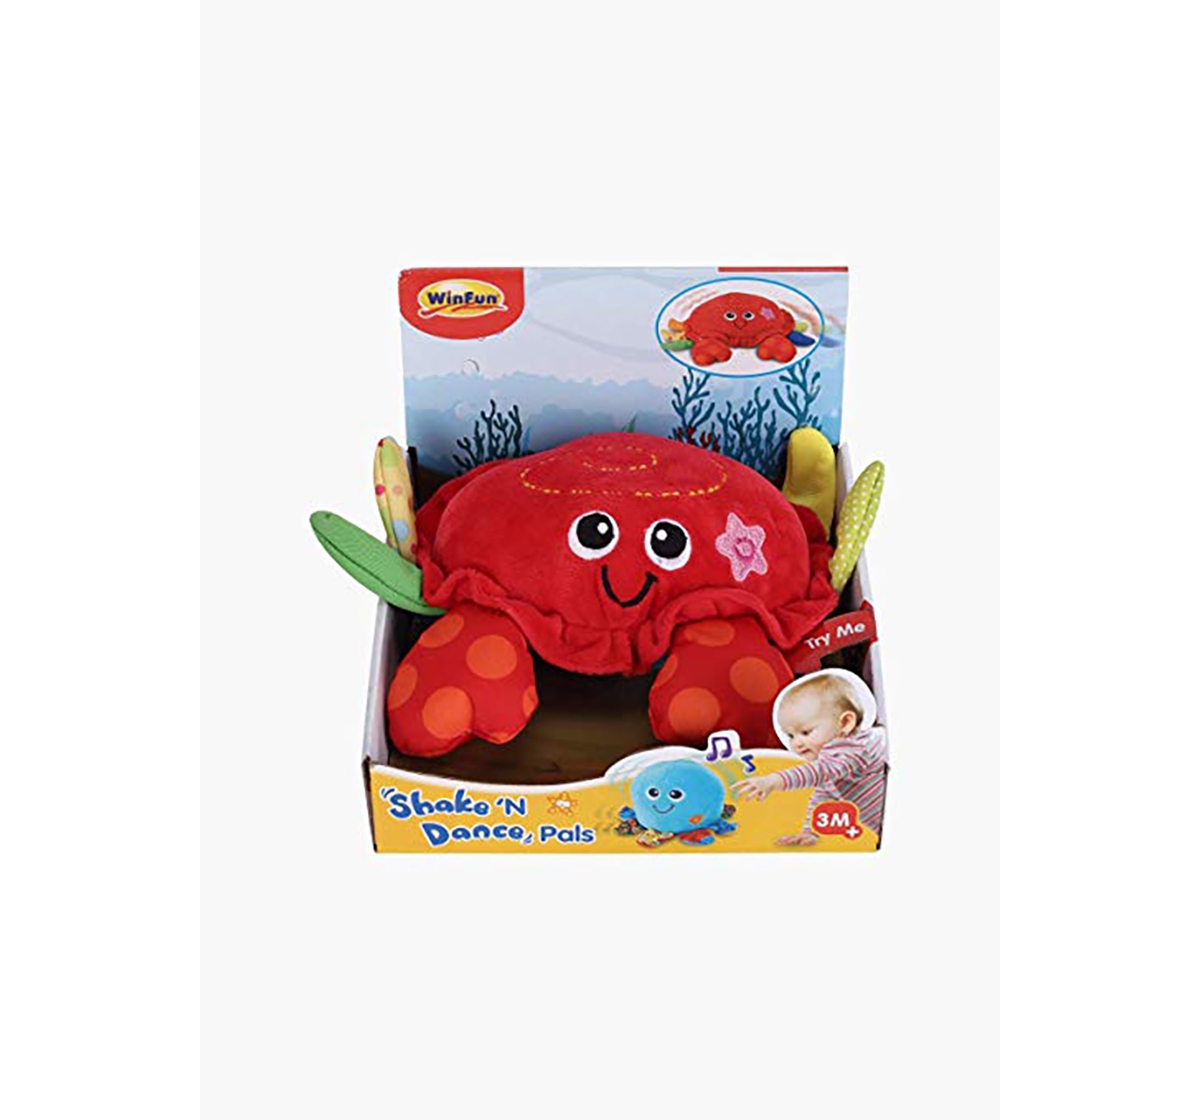 WinFun | Winfun Shake N Dance Pals - Crab Early Learner Toys for Kids age 3M+ (Red) 1